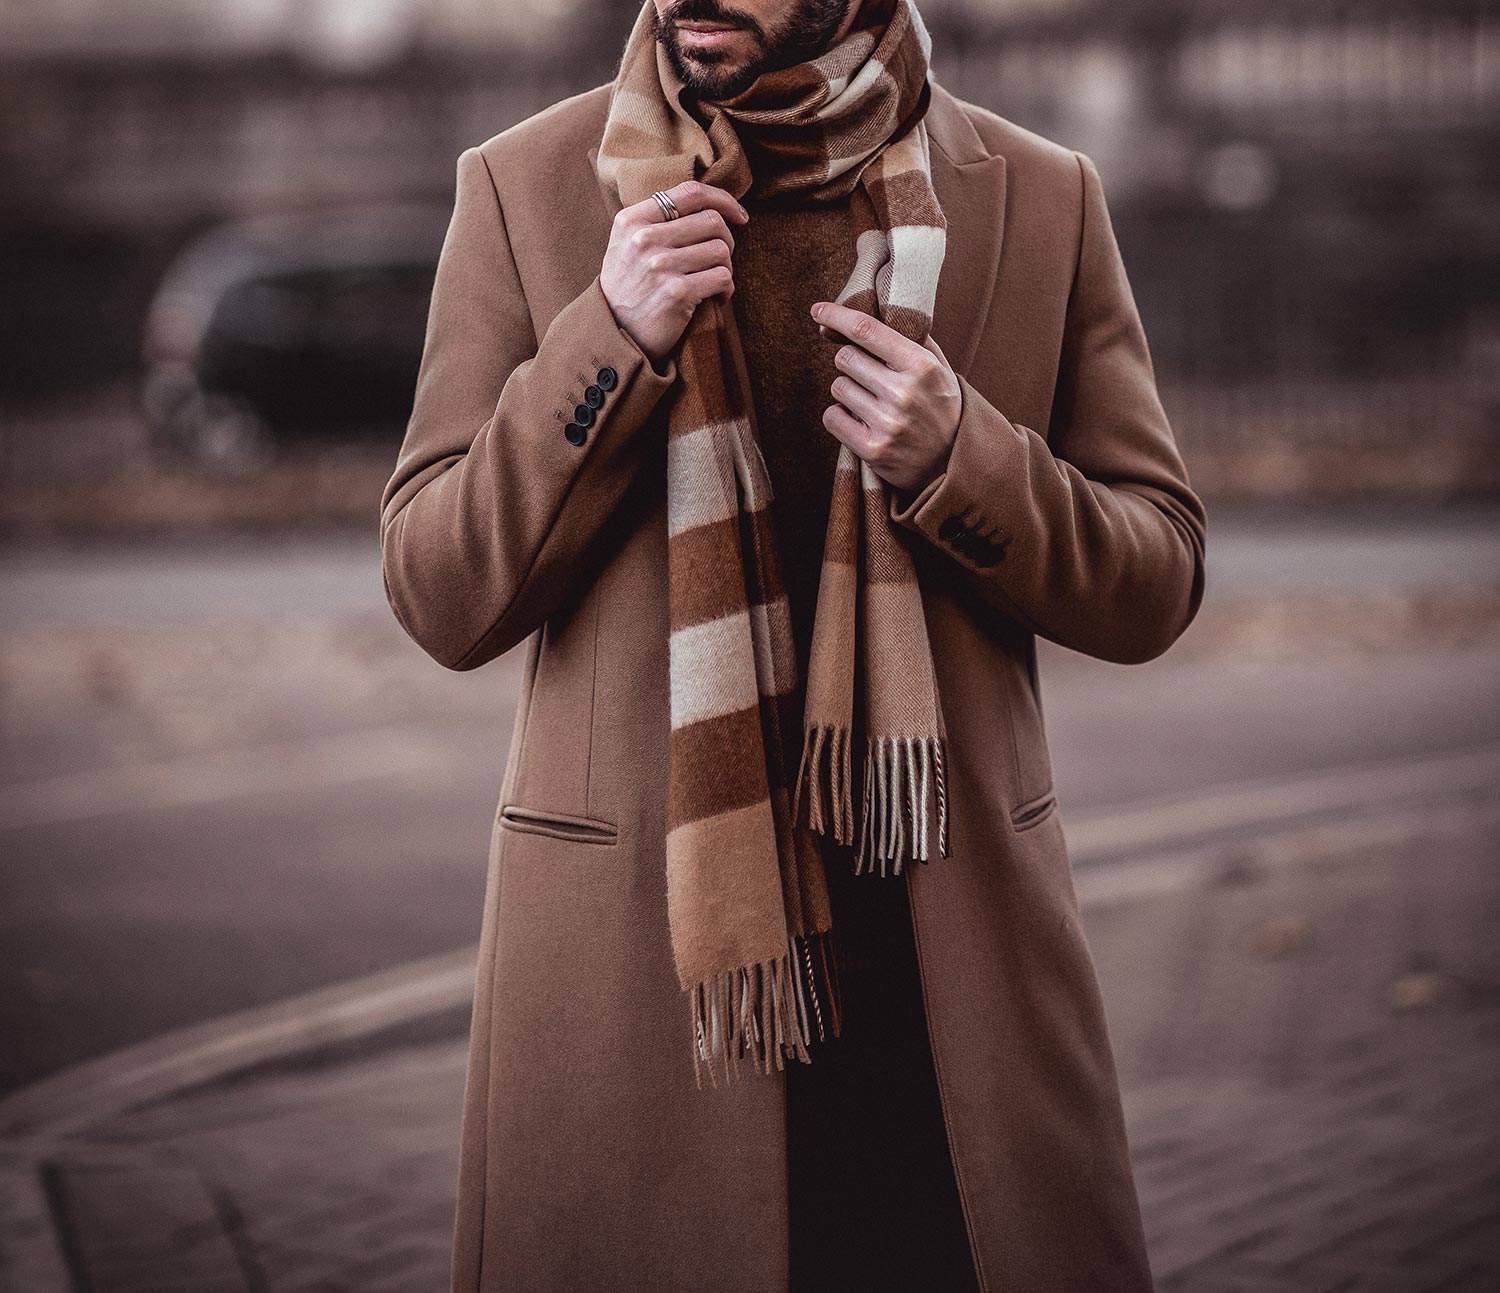 Gents Guide To Winter Fashion Essentials - Your Average Guy